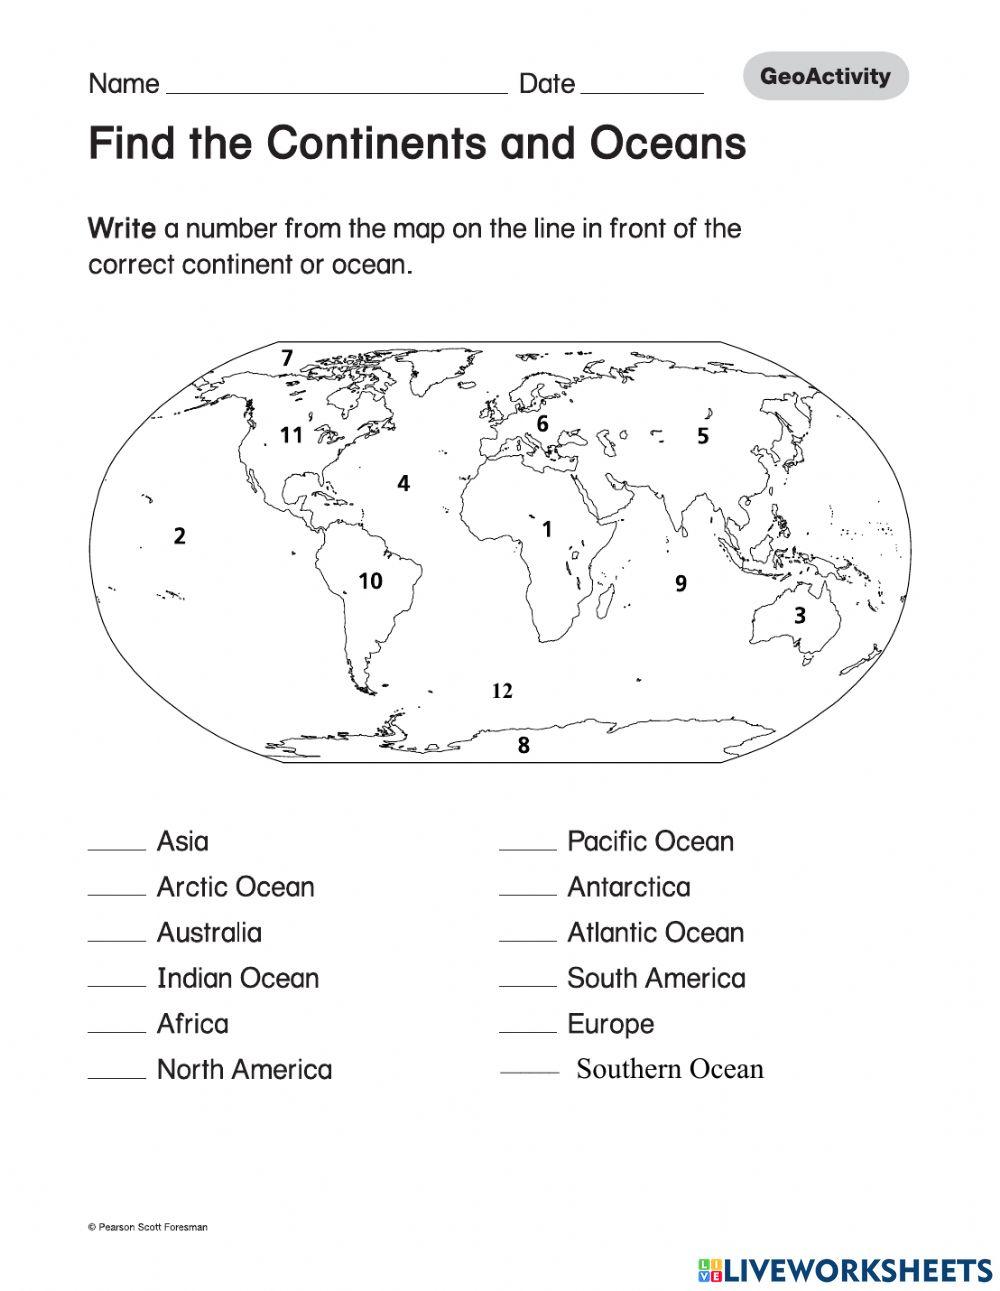 Continents and Oceans Social Studies exercise | Live Worksheets